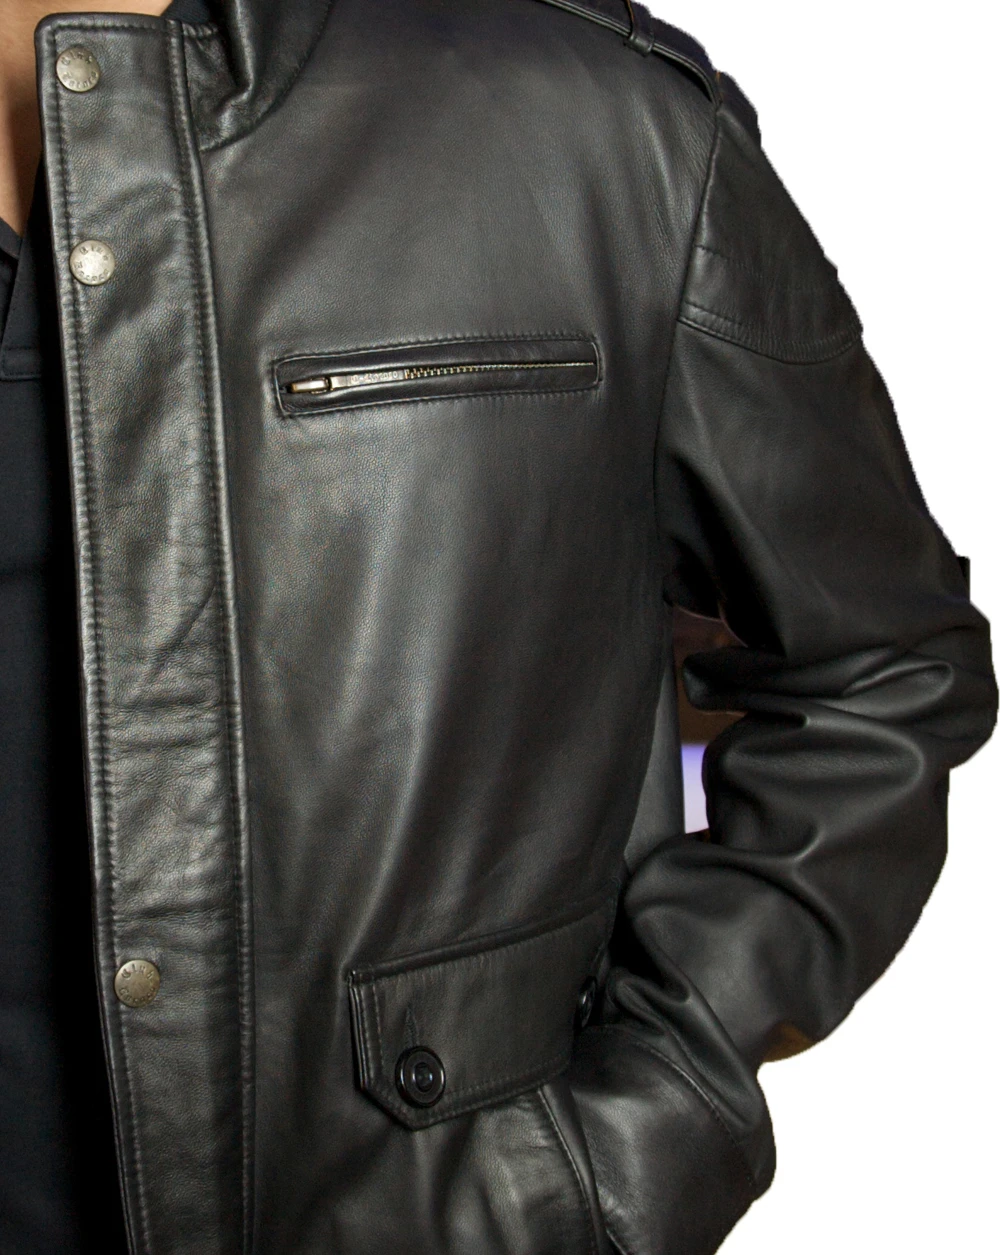 Give your casual looks a smart finish in this leather jacket